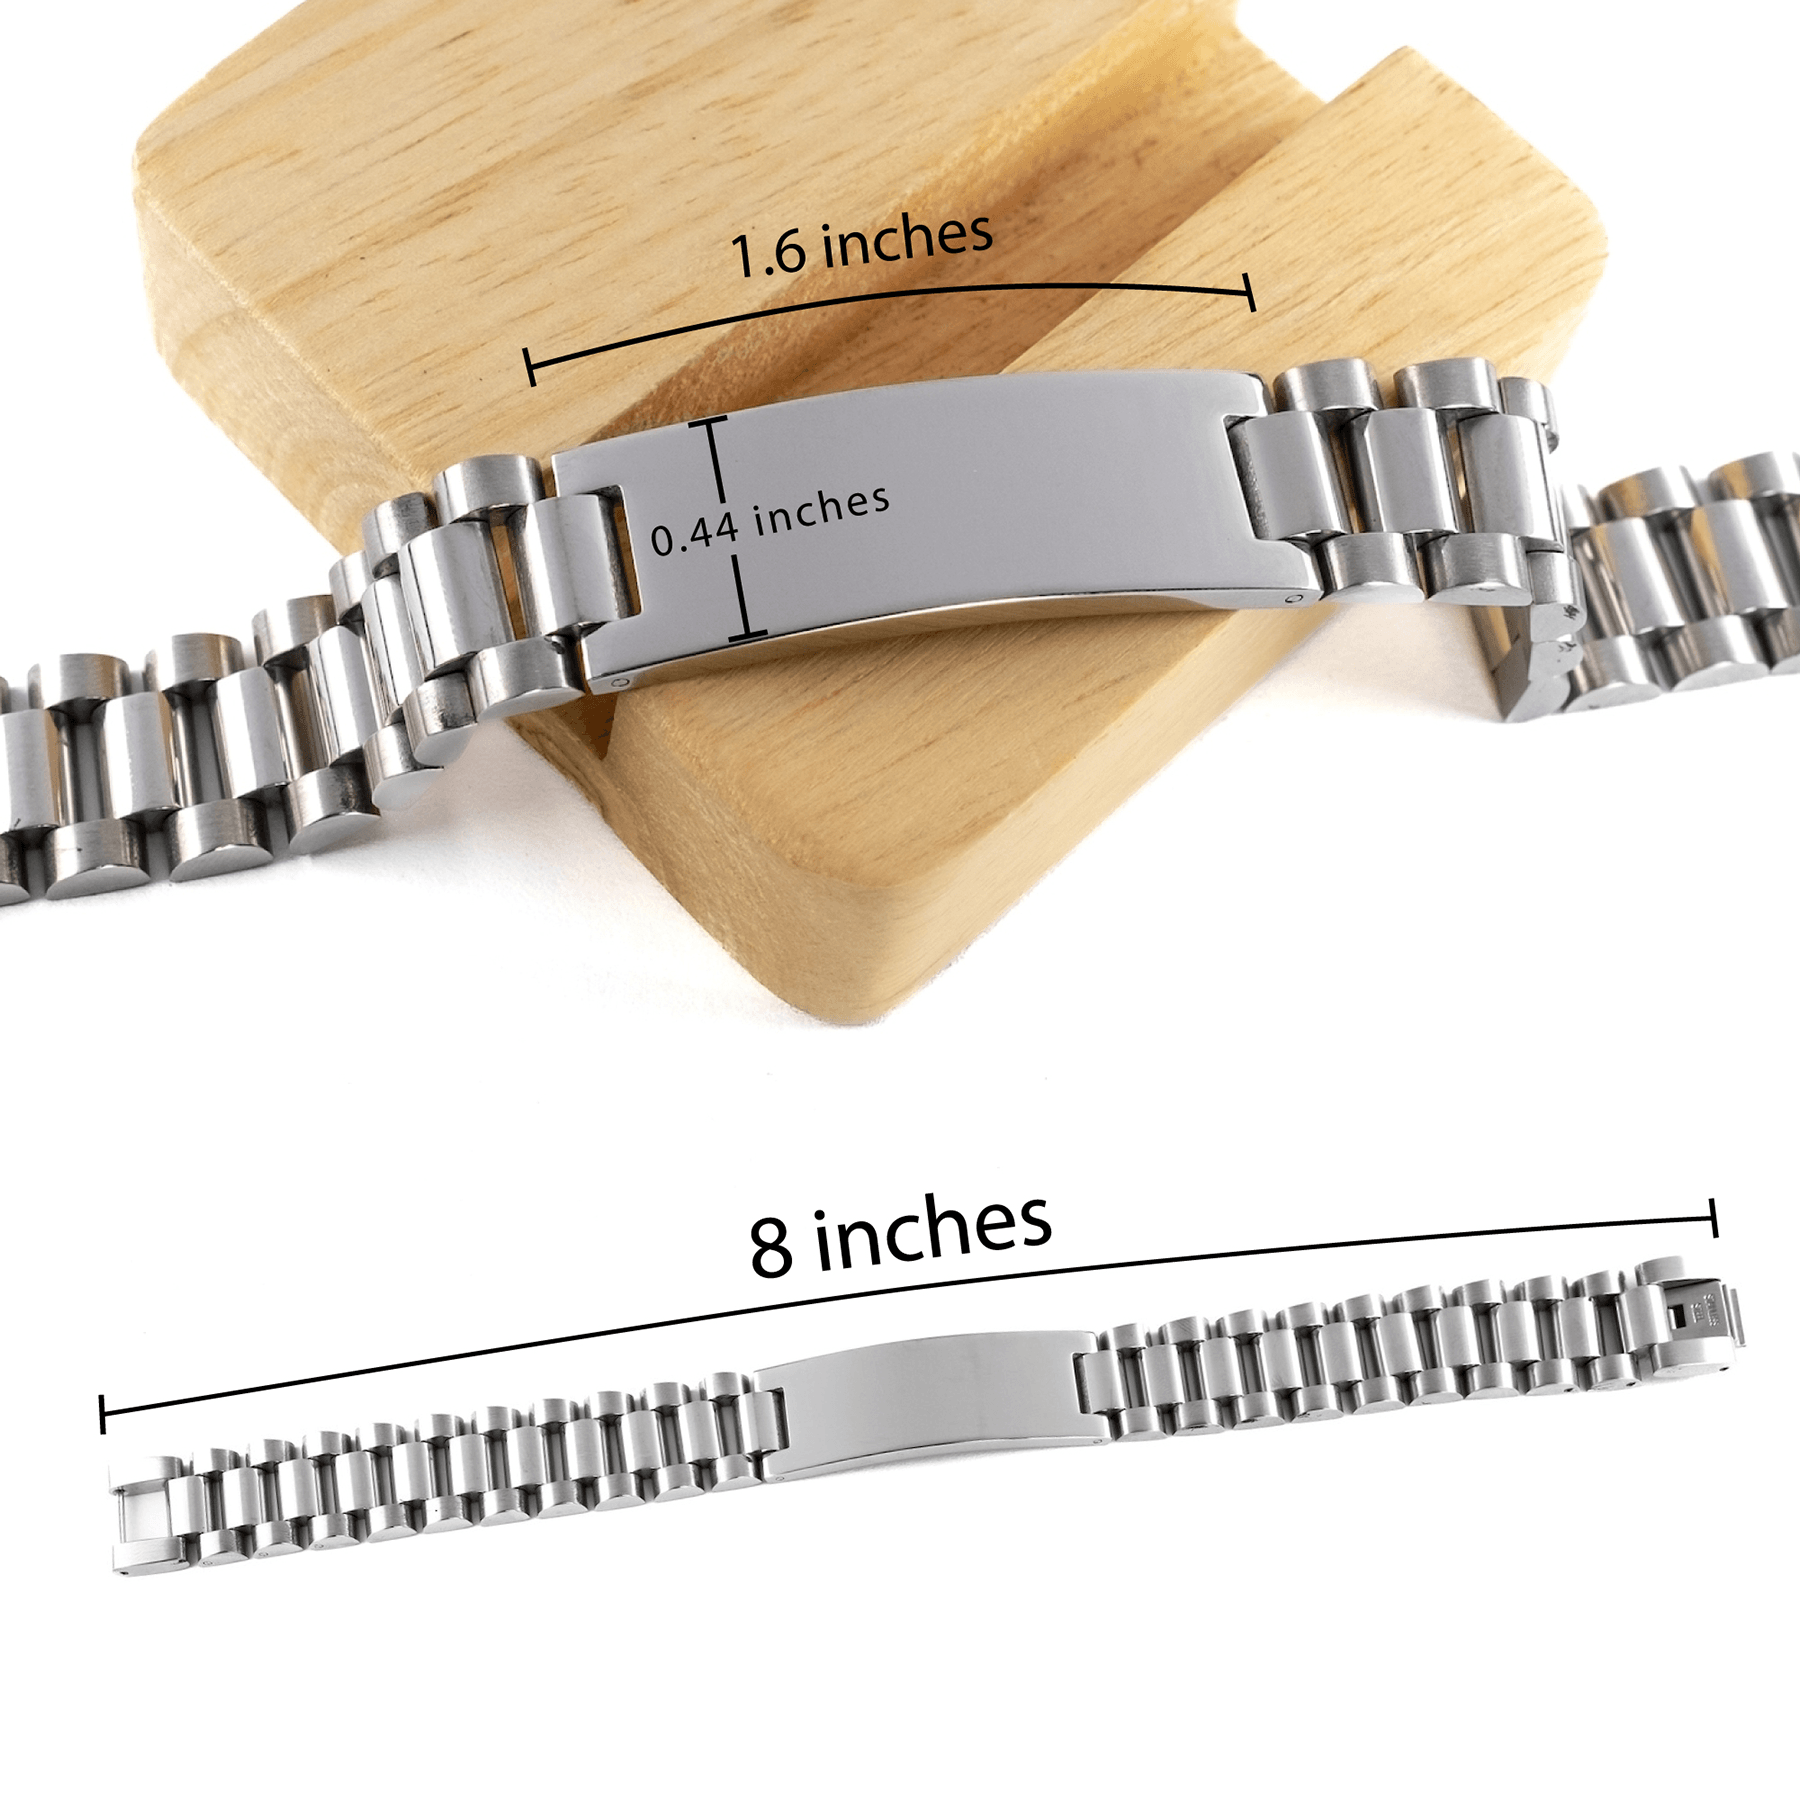 Fitness Trainer Ladder Stainless Steel Engraved Bracelet - Thanks for being who you are - Birthday Christmas Jewelry Gifts Coworkers Colleague Boss - Mallard Moon Gift Shop